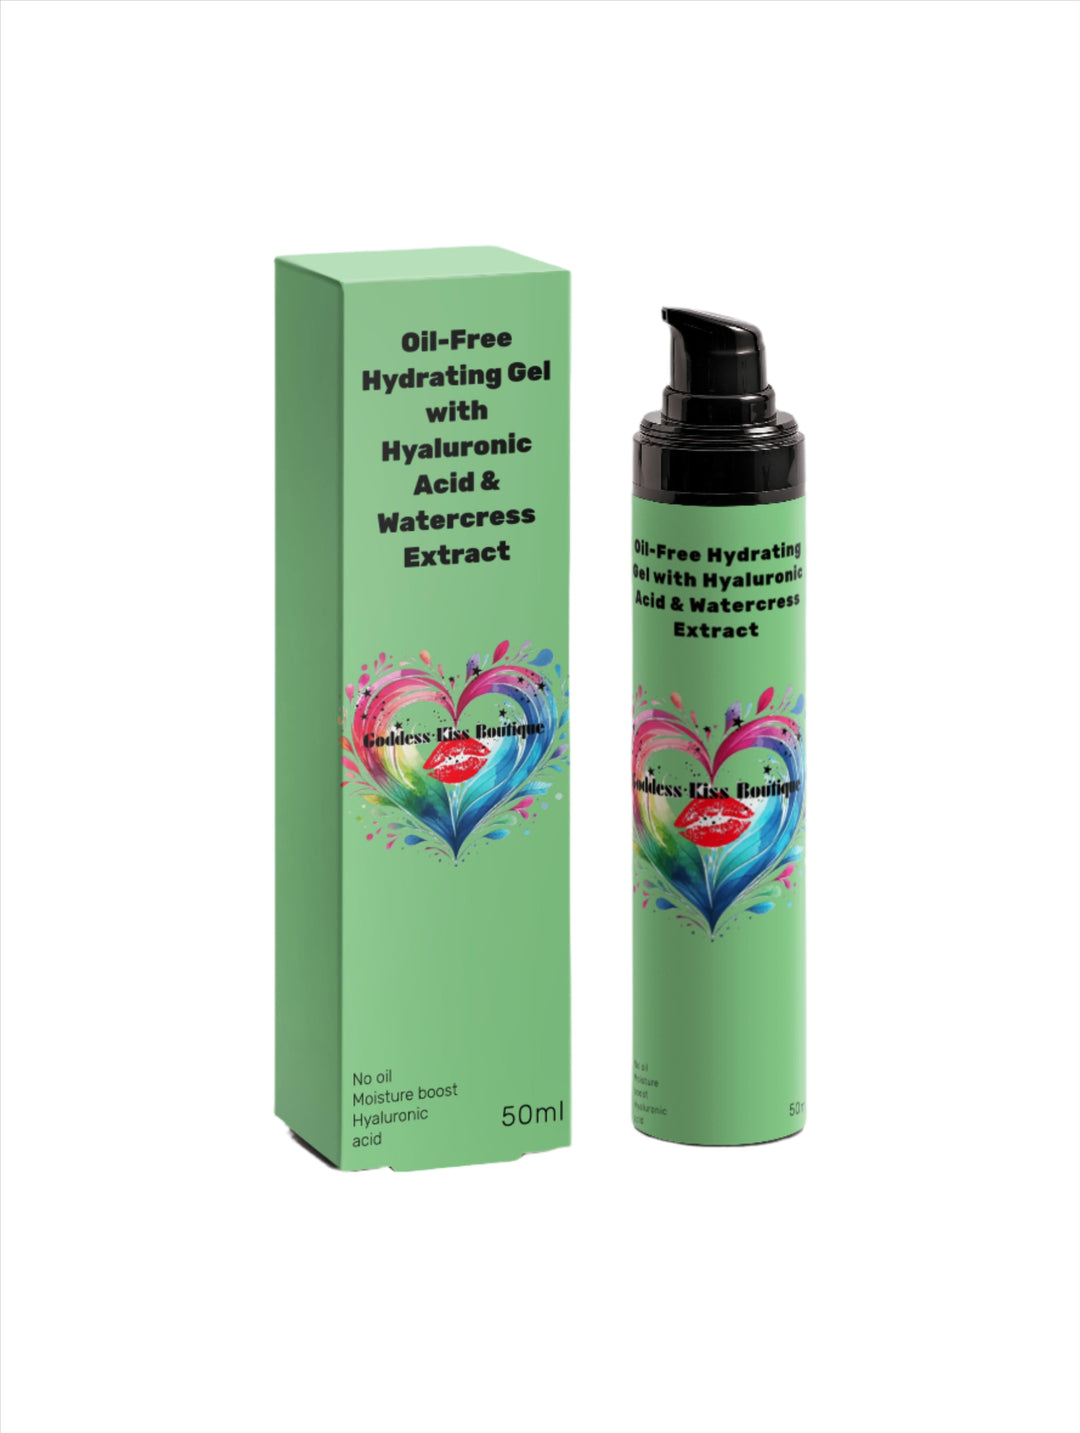 Oil-Free Hydrating Gel with Hyaluronic Acid & Watercress Extract